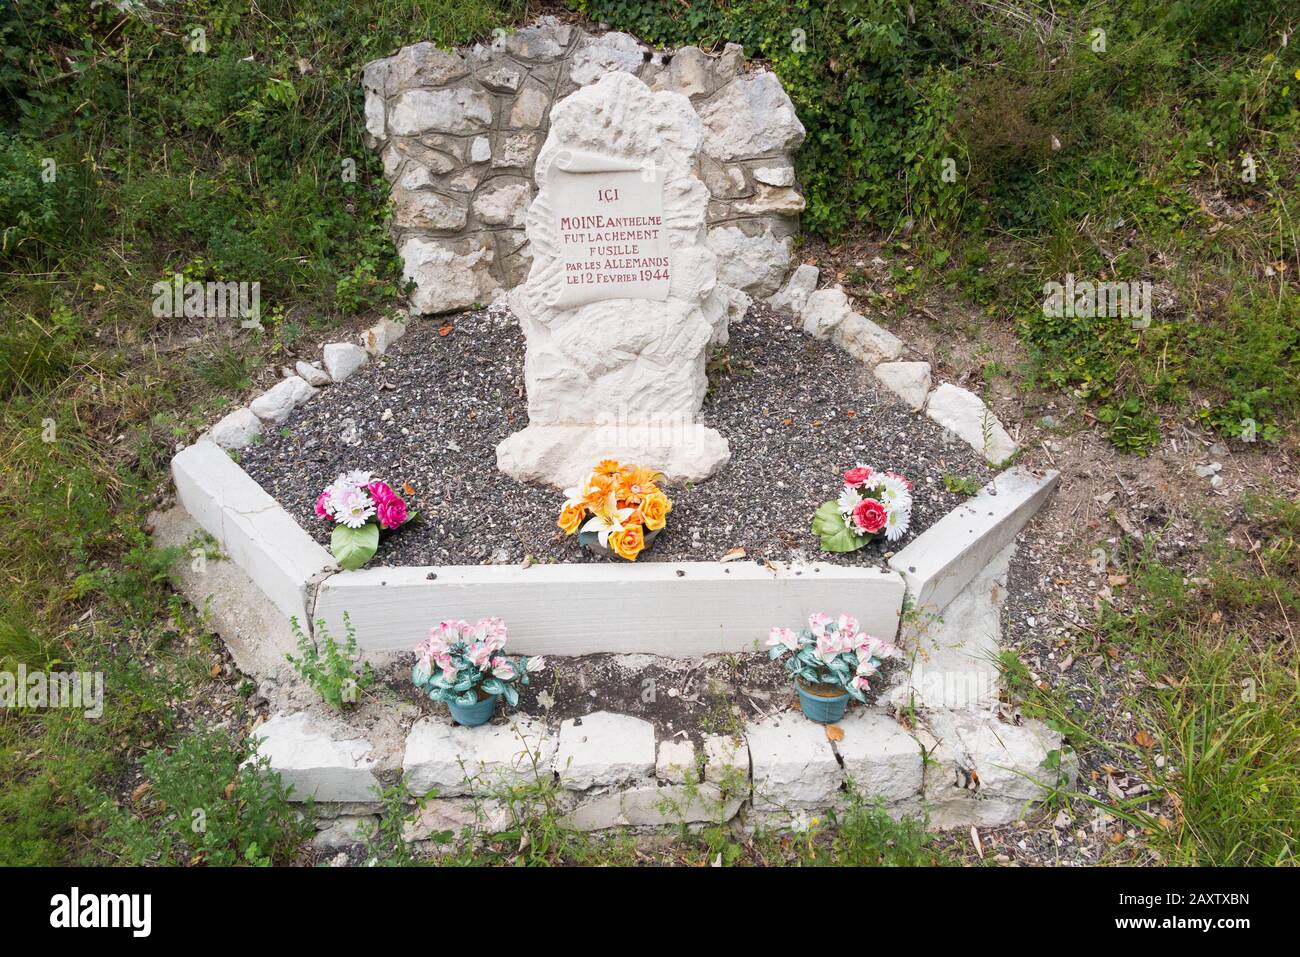 Monument where Monk Anthelme was shot / executed in a cowardly fashion by German Nazis forces in February 1944, during World War Two / 2 / II / WW2 in Ain, France, which was under the authority of Vichy France (112) Stock Photo